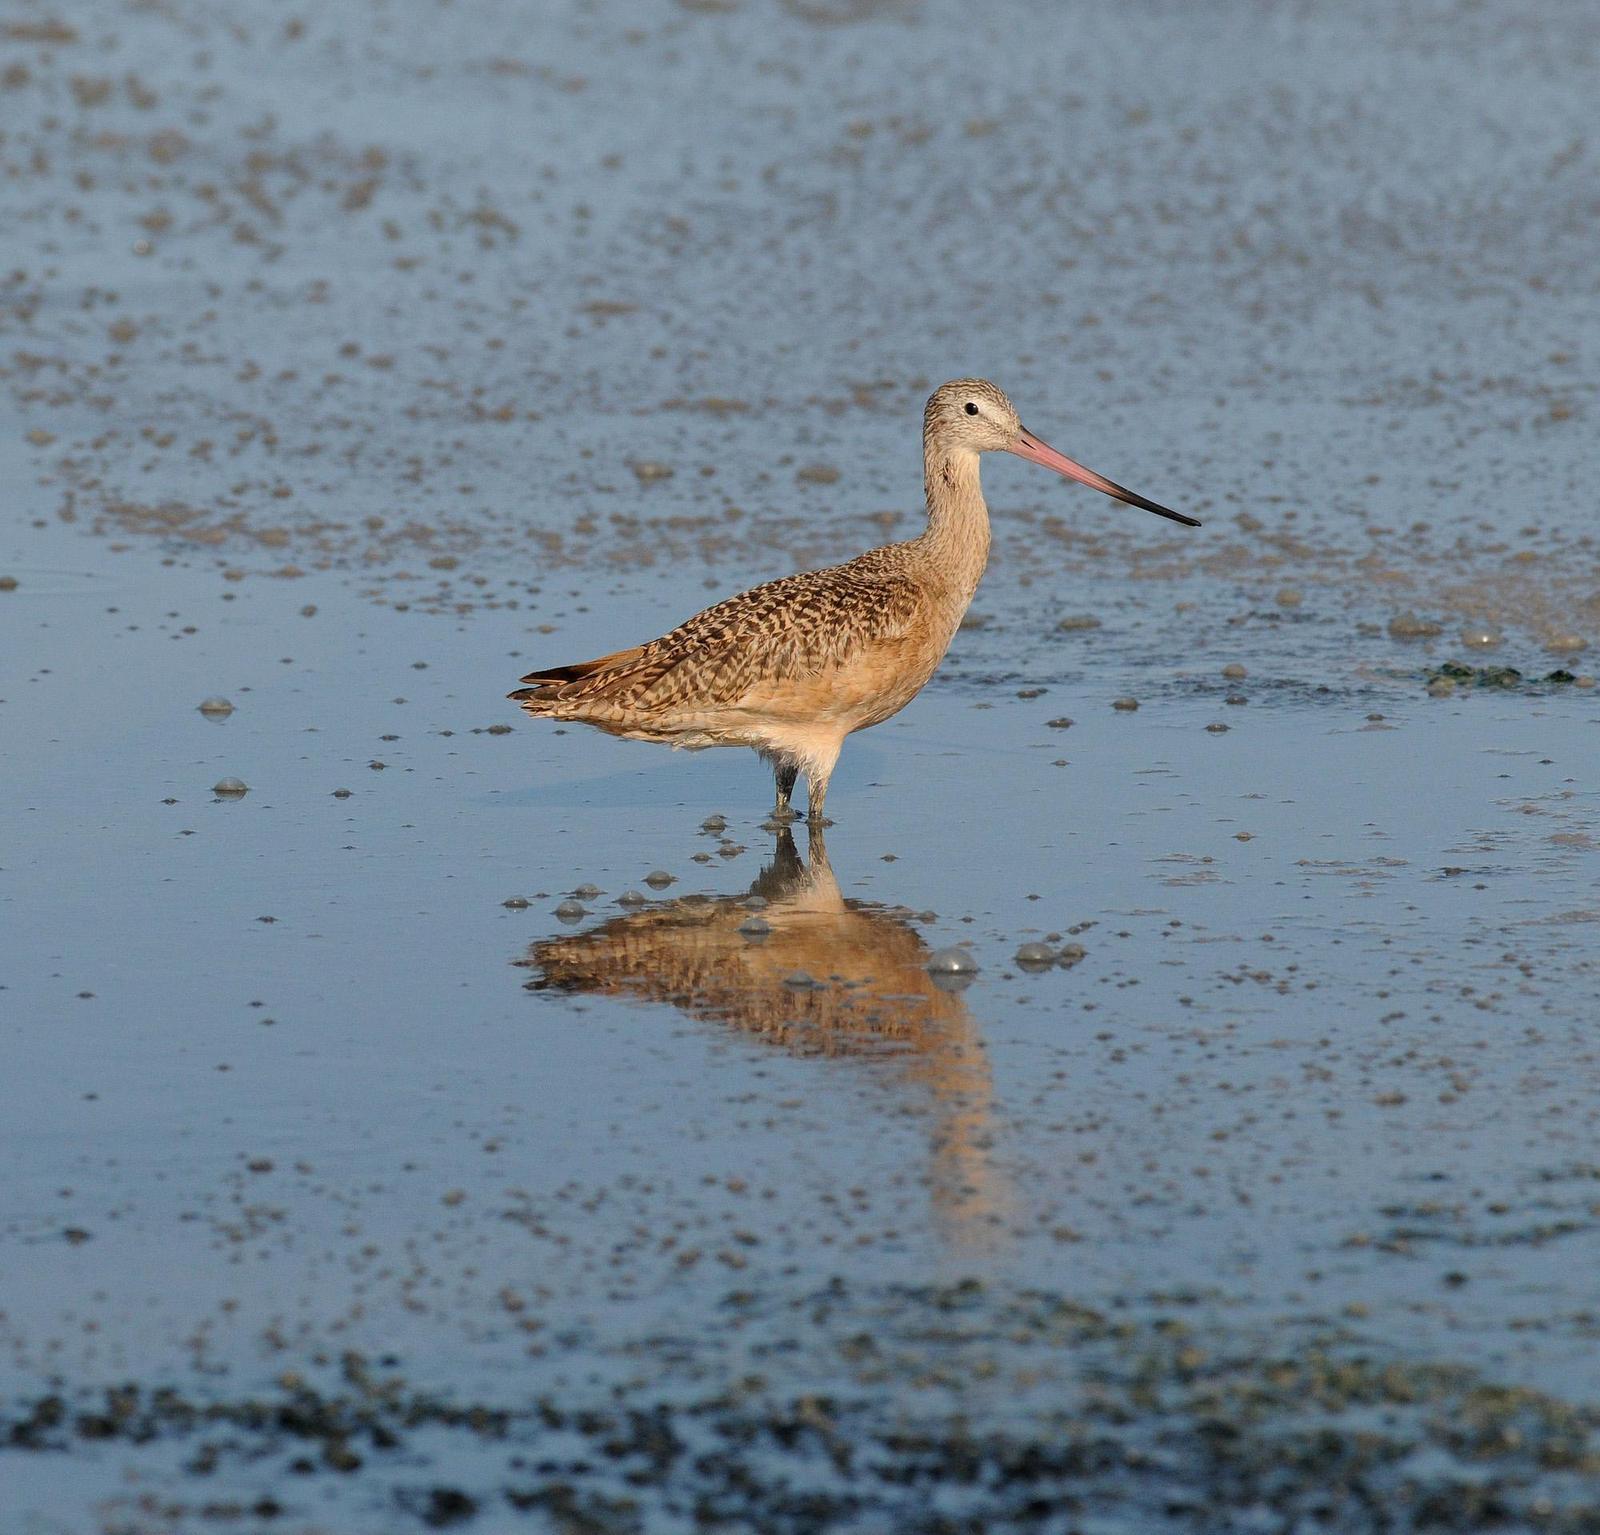 Marbled Godwit Photo by Steven Mlodinow